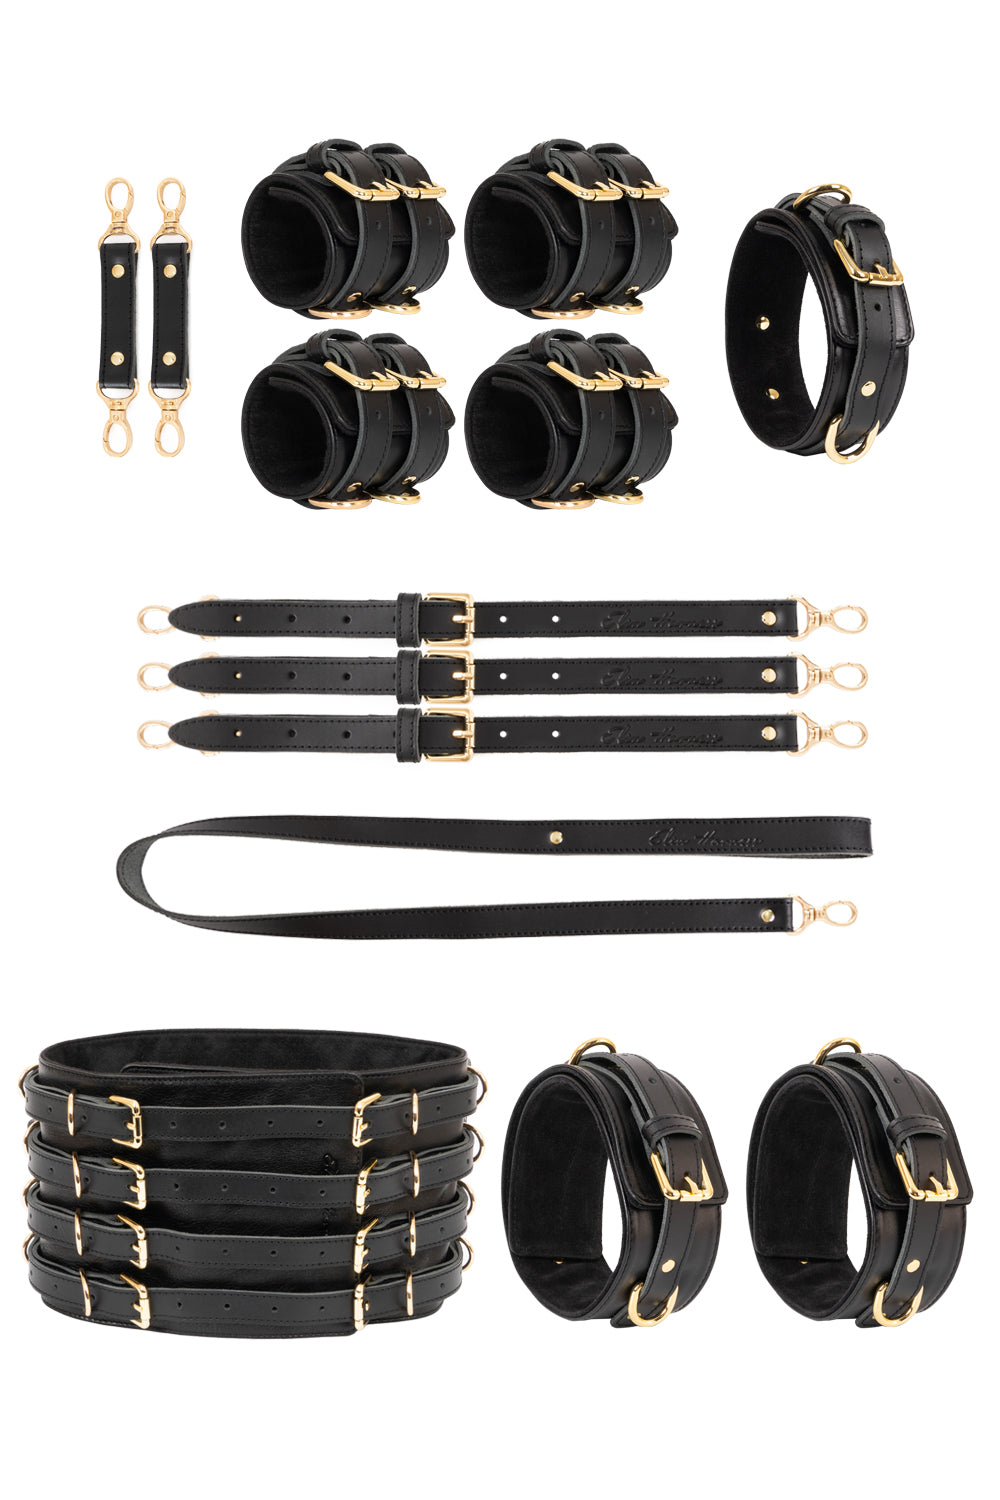 Black Luxury Full Leather Set with Wide Belt and Cuffs